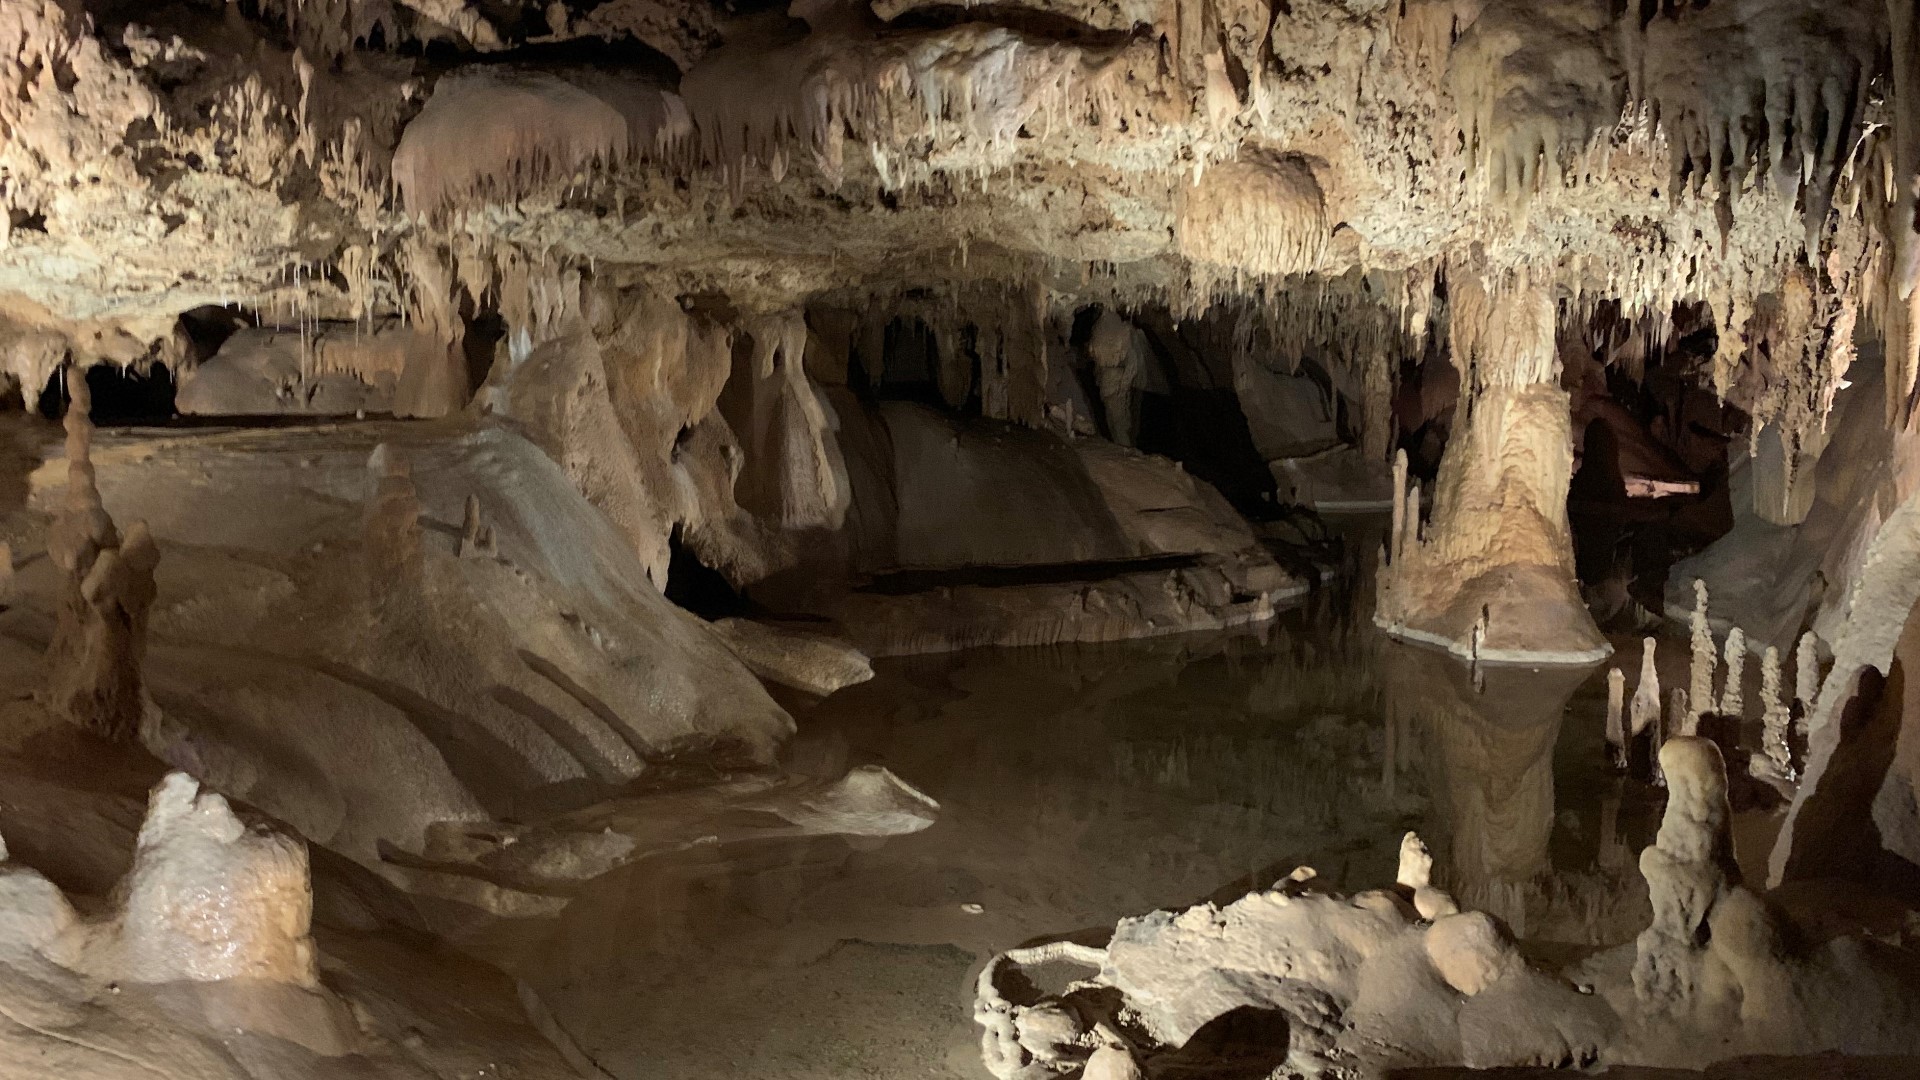 If you're looking for an adventure that's down under, we got the perfect place for you! Inner Space Cavern in Georgetown, Texas, is full of history and beautiful views. It's a Texas treasure!